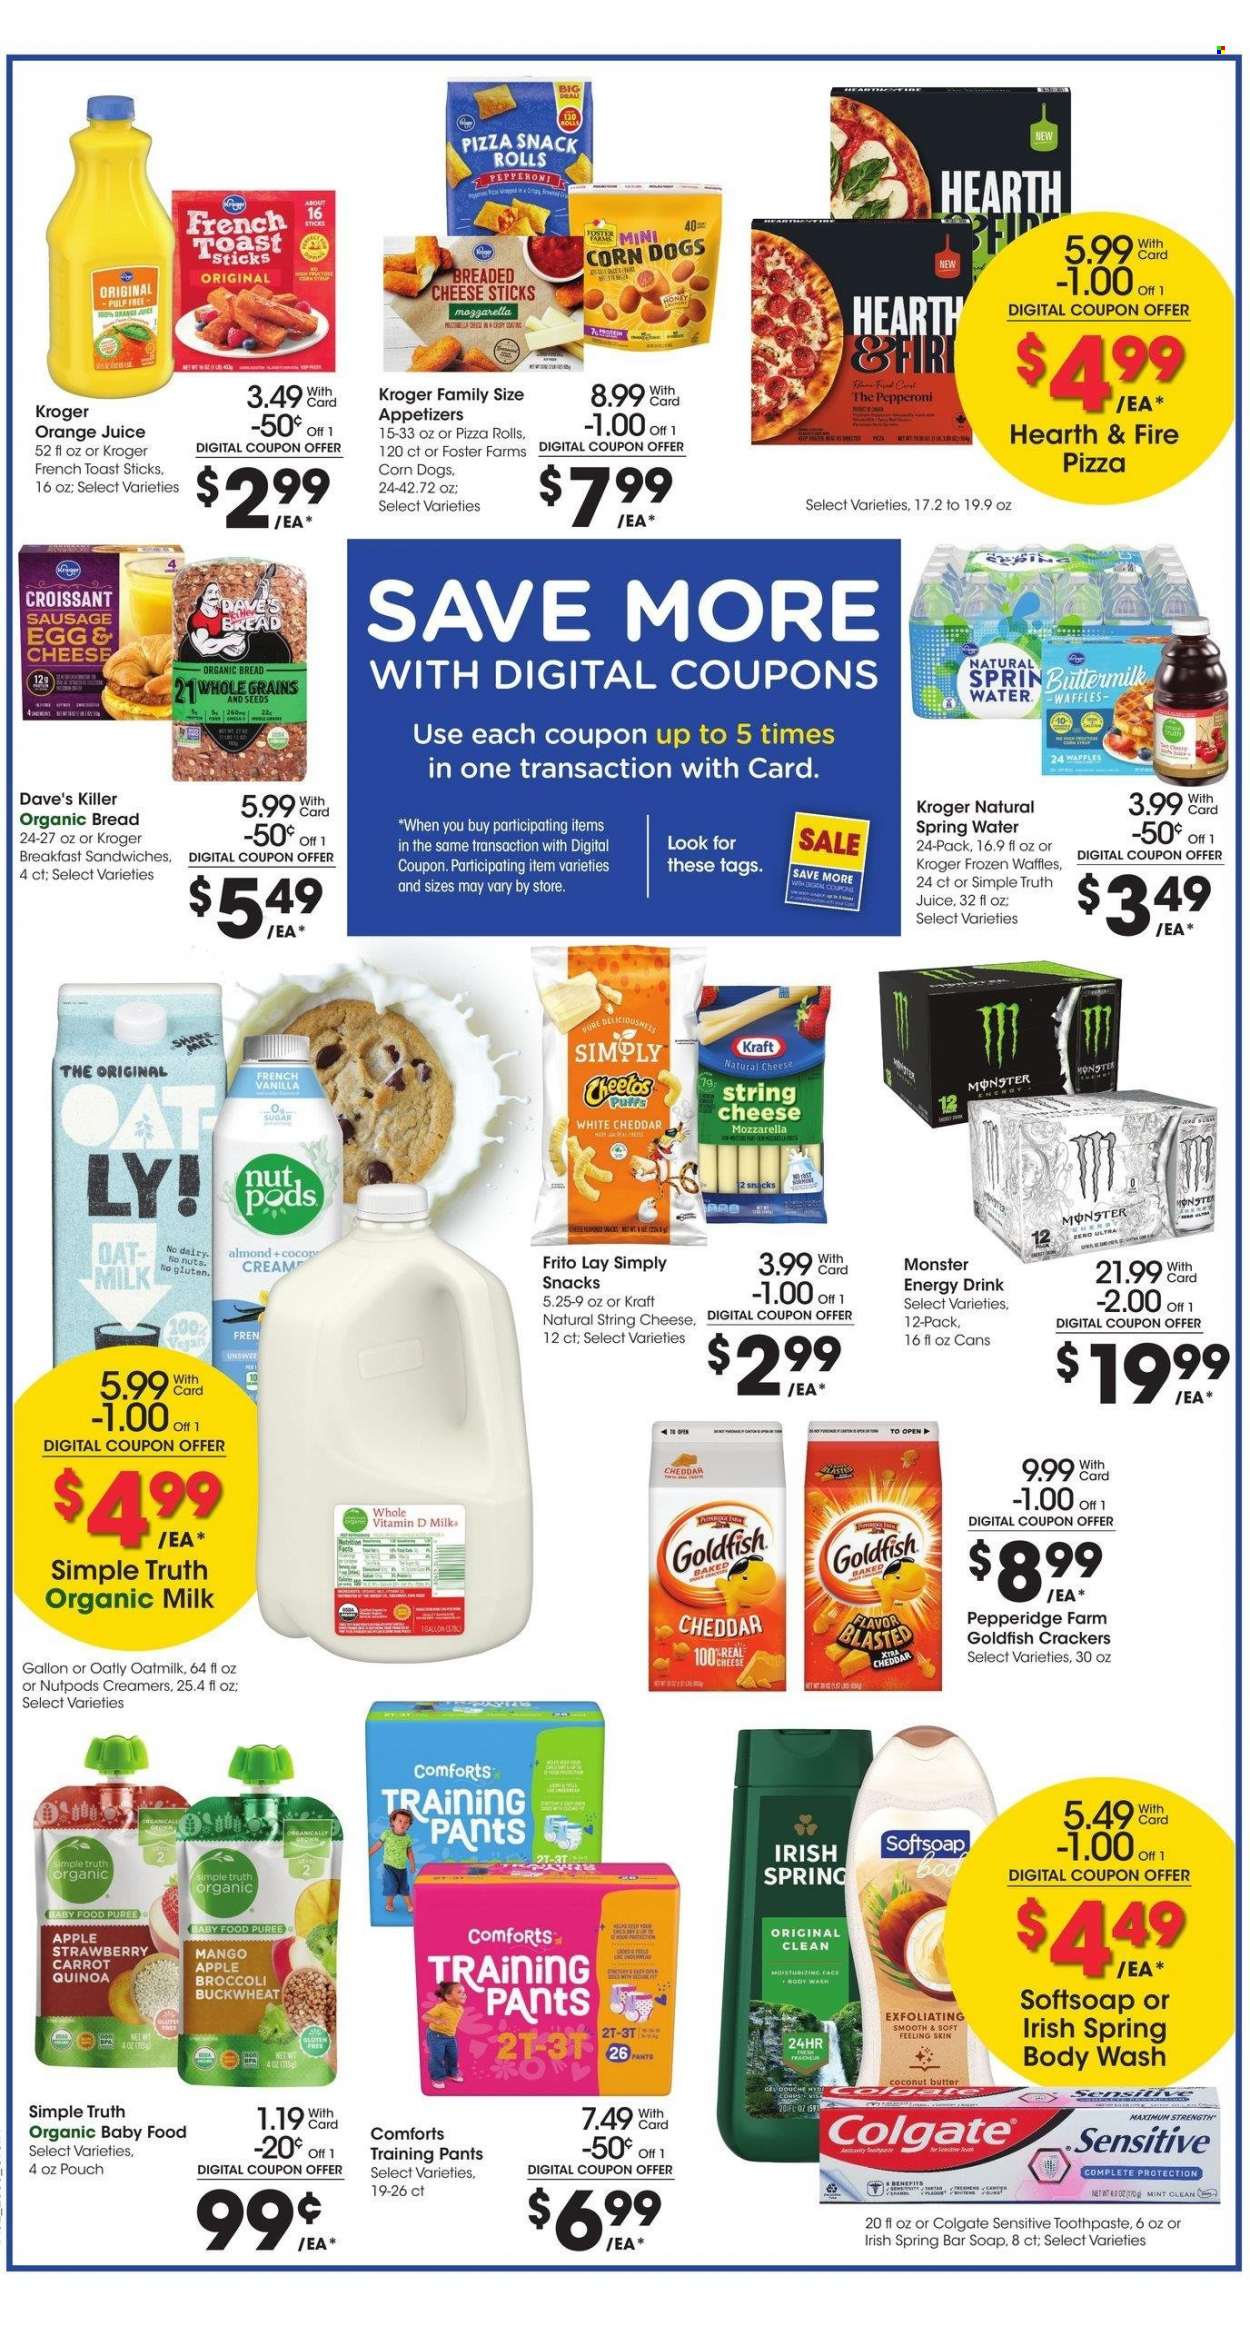 thumbnail - Kroger Flyer - 03/22/2023 - 03/28/2023 - Sales products - bread, pizza rolls, Ace, waffles, broccoli, coconut, pizza, sandwich, Kraft®, sausage, pepperoni, string cheese, organic milk, shake, oat milk, cheese sticks, snack, crackers, Cheetos, Goldfish, sugar, buckwheat, quinoa, orange juice, juice, energy drink, Monster, Monster Energy, spring water, water, organic baby food, pants, baby pants, body wash, Softsoap, soap bar, soap, Colgate, toothpaste. Page 6.